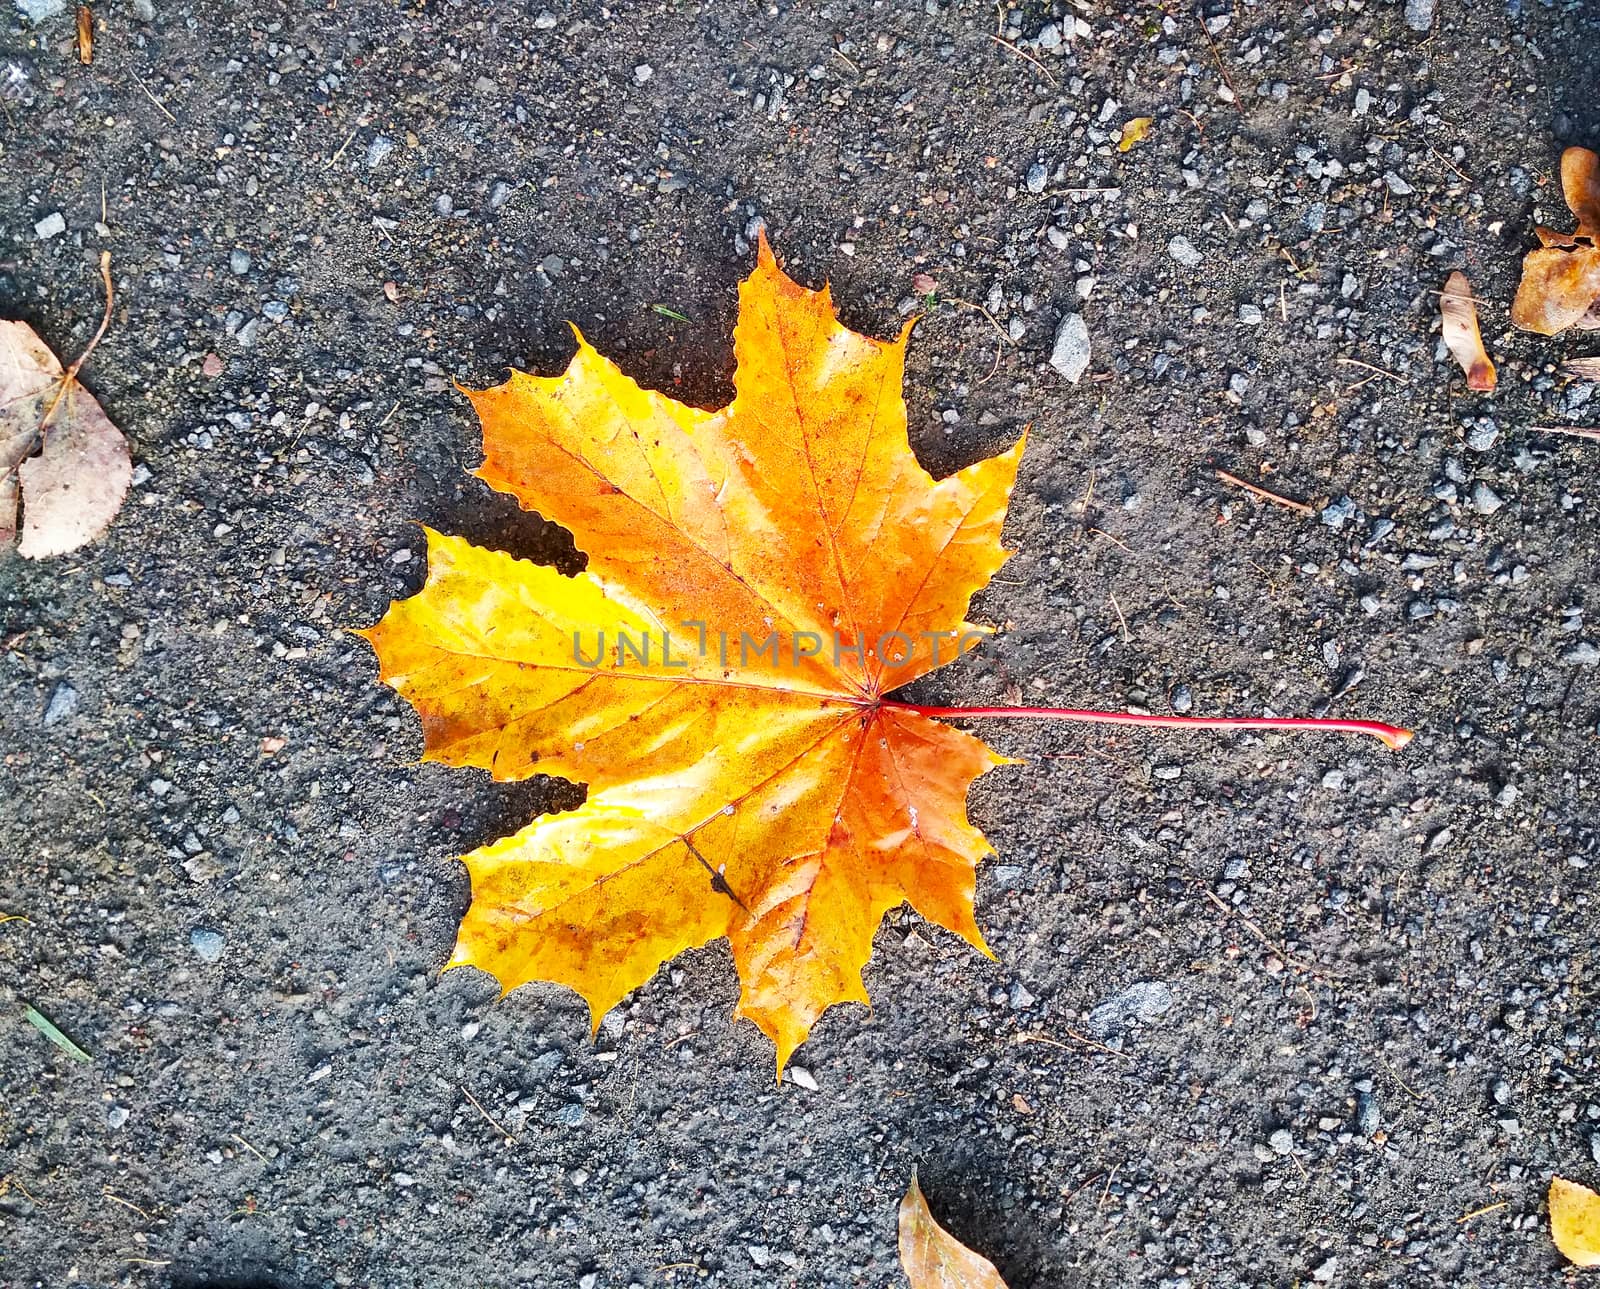 
Photo of an autumn leaf of a tree on the surface of the earth from above.